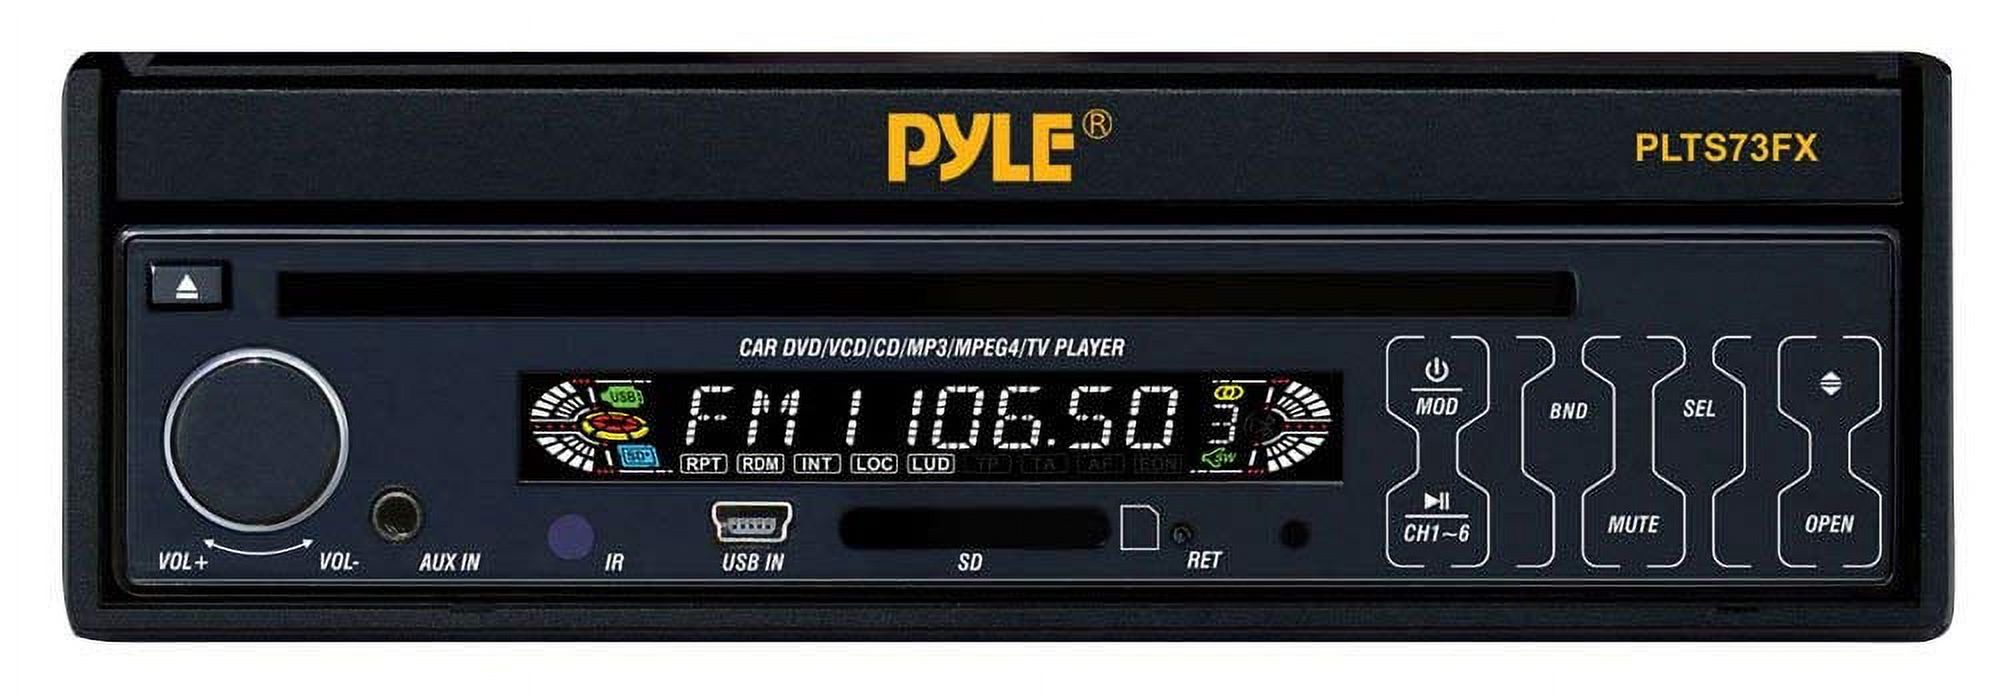 PYLE PLTS73FX - Single DIN In Dash Car Stereo Head Unit w/ 7inch Flip Out Touch Screen Monitor, Remote - Audio Video Receiver System with Radio, Camera and CD DVD Player Input, MP3, USB, SD Reader - image 4 of 5